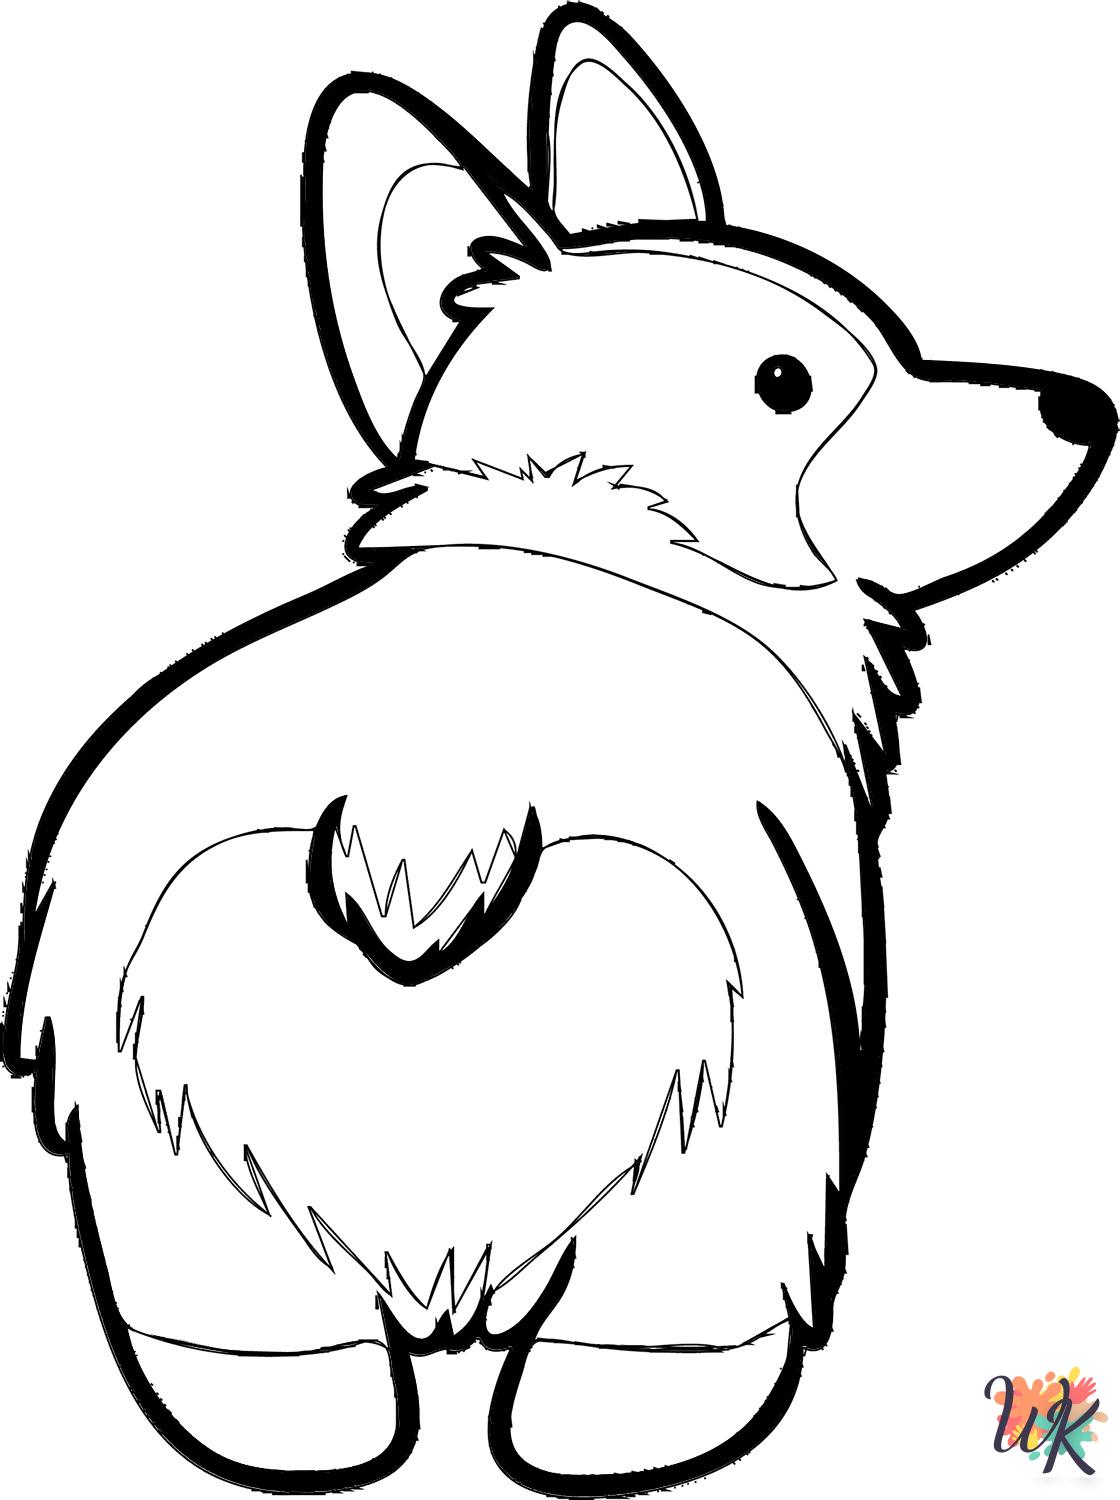 detailed Corgi coloring pages for adults